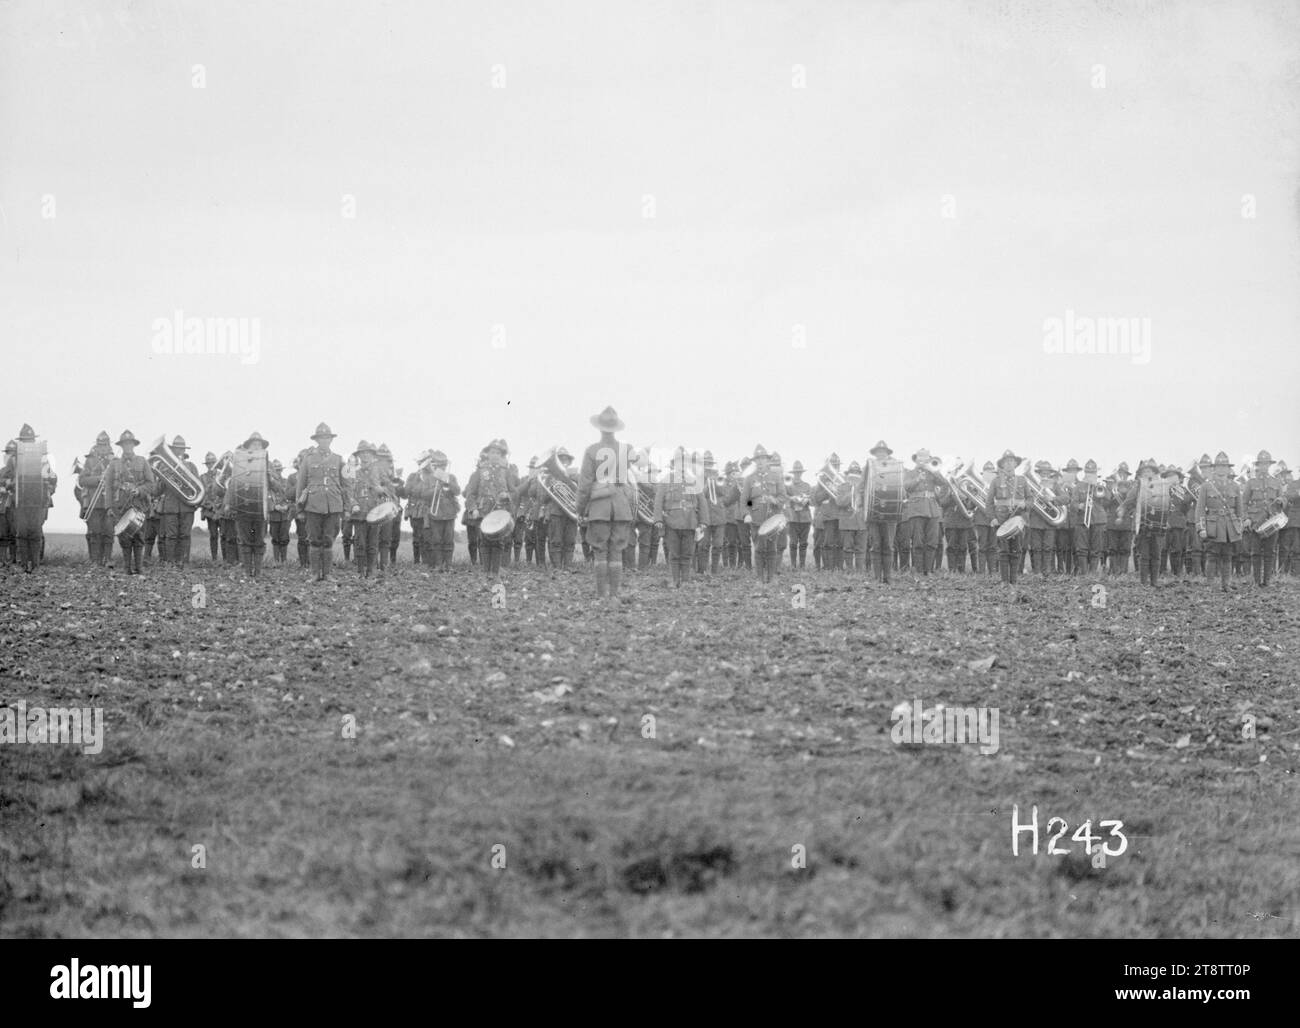 The New Zealand Band playing at the Anzac Horse Show, World War I, A distant view of the New Zealand (Divisional?) Band playing at the Anzac Horse Show during World War I. Photograph taken France 15 September 1917 Stock Photo